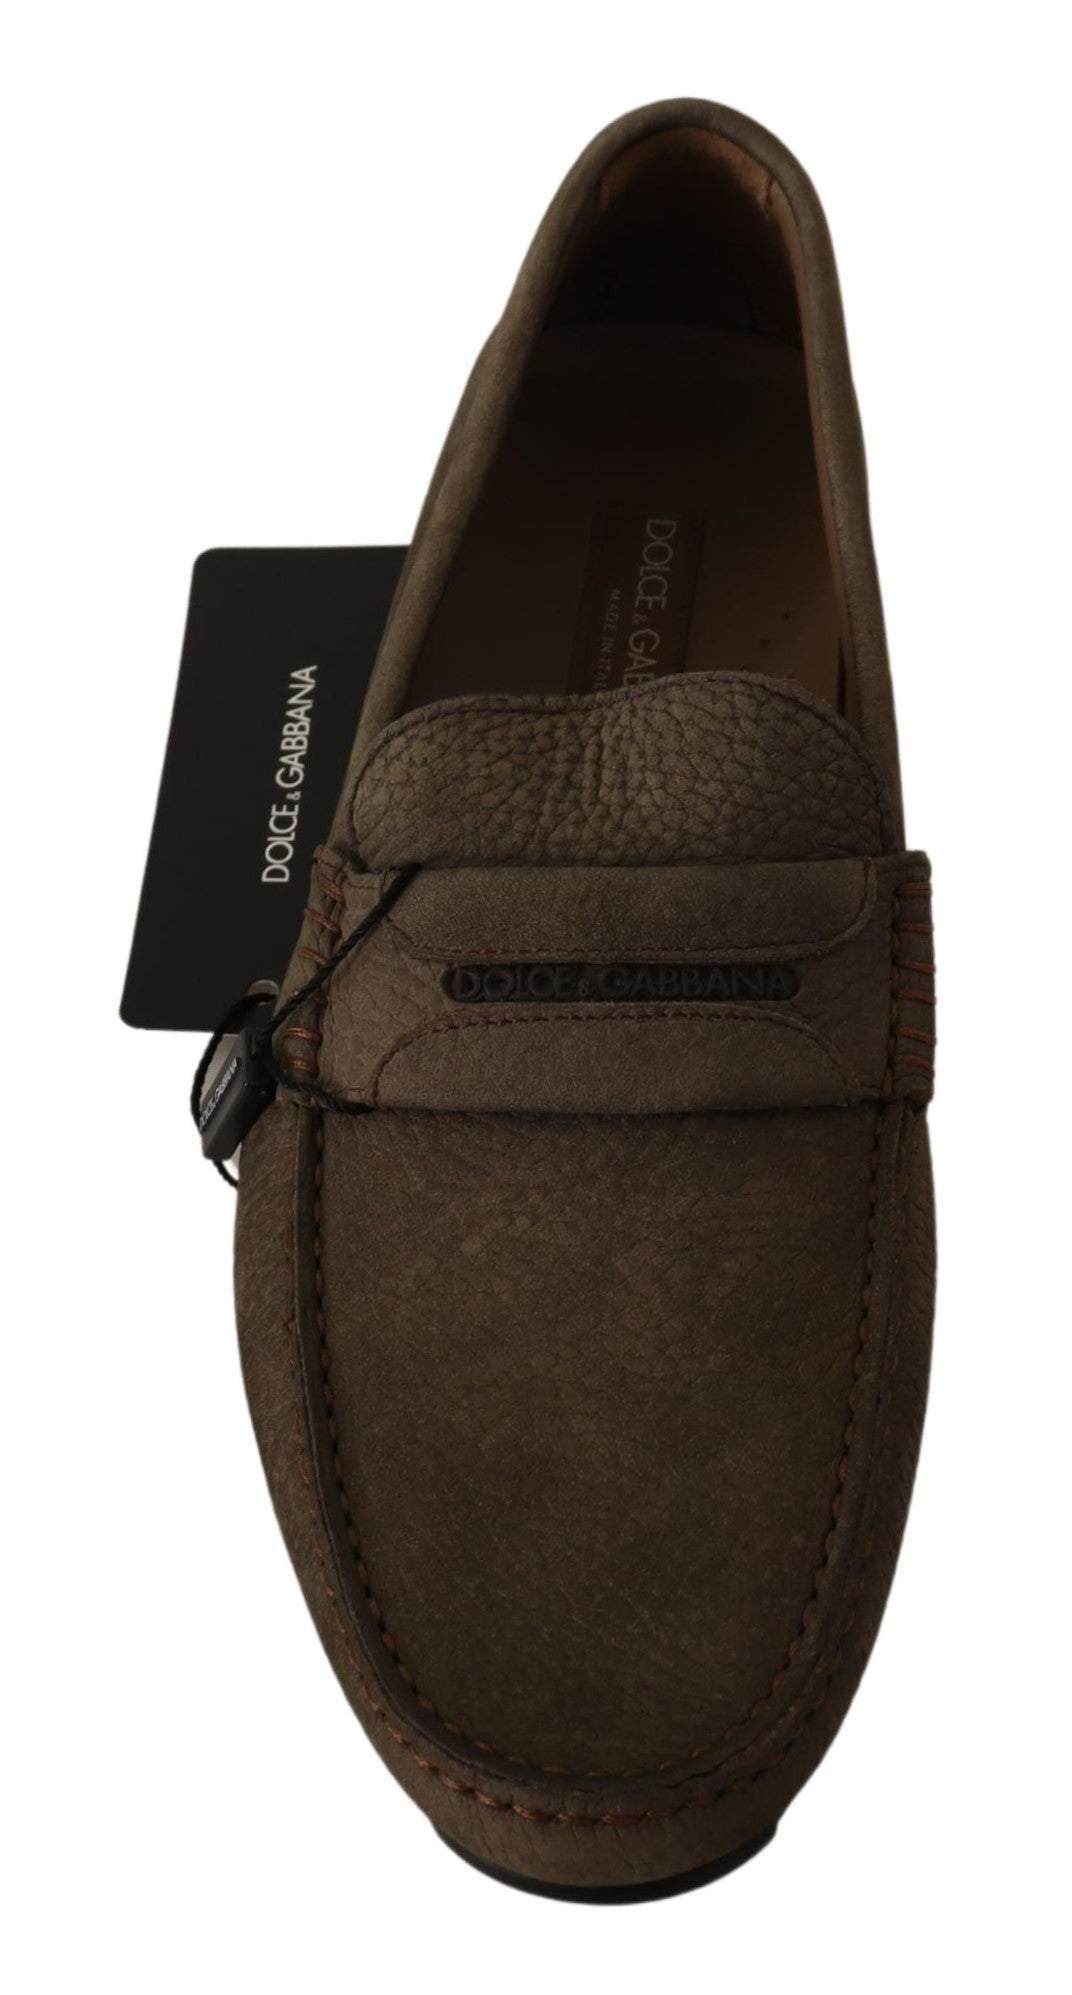 Dolce & Gabbana Brown Leather Flat Slip On Mocassin Shoes #men, Brown, Dolce & Gabbana, EU39/US6, EU40/US7, EU42/US9, EU43/US10, EU45/US12, feed-agegroup-adult, feed-color-Brown, feed-gender-male, Loafers - Men - Shoes at SEYMAYKA